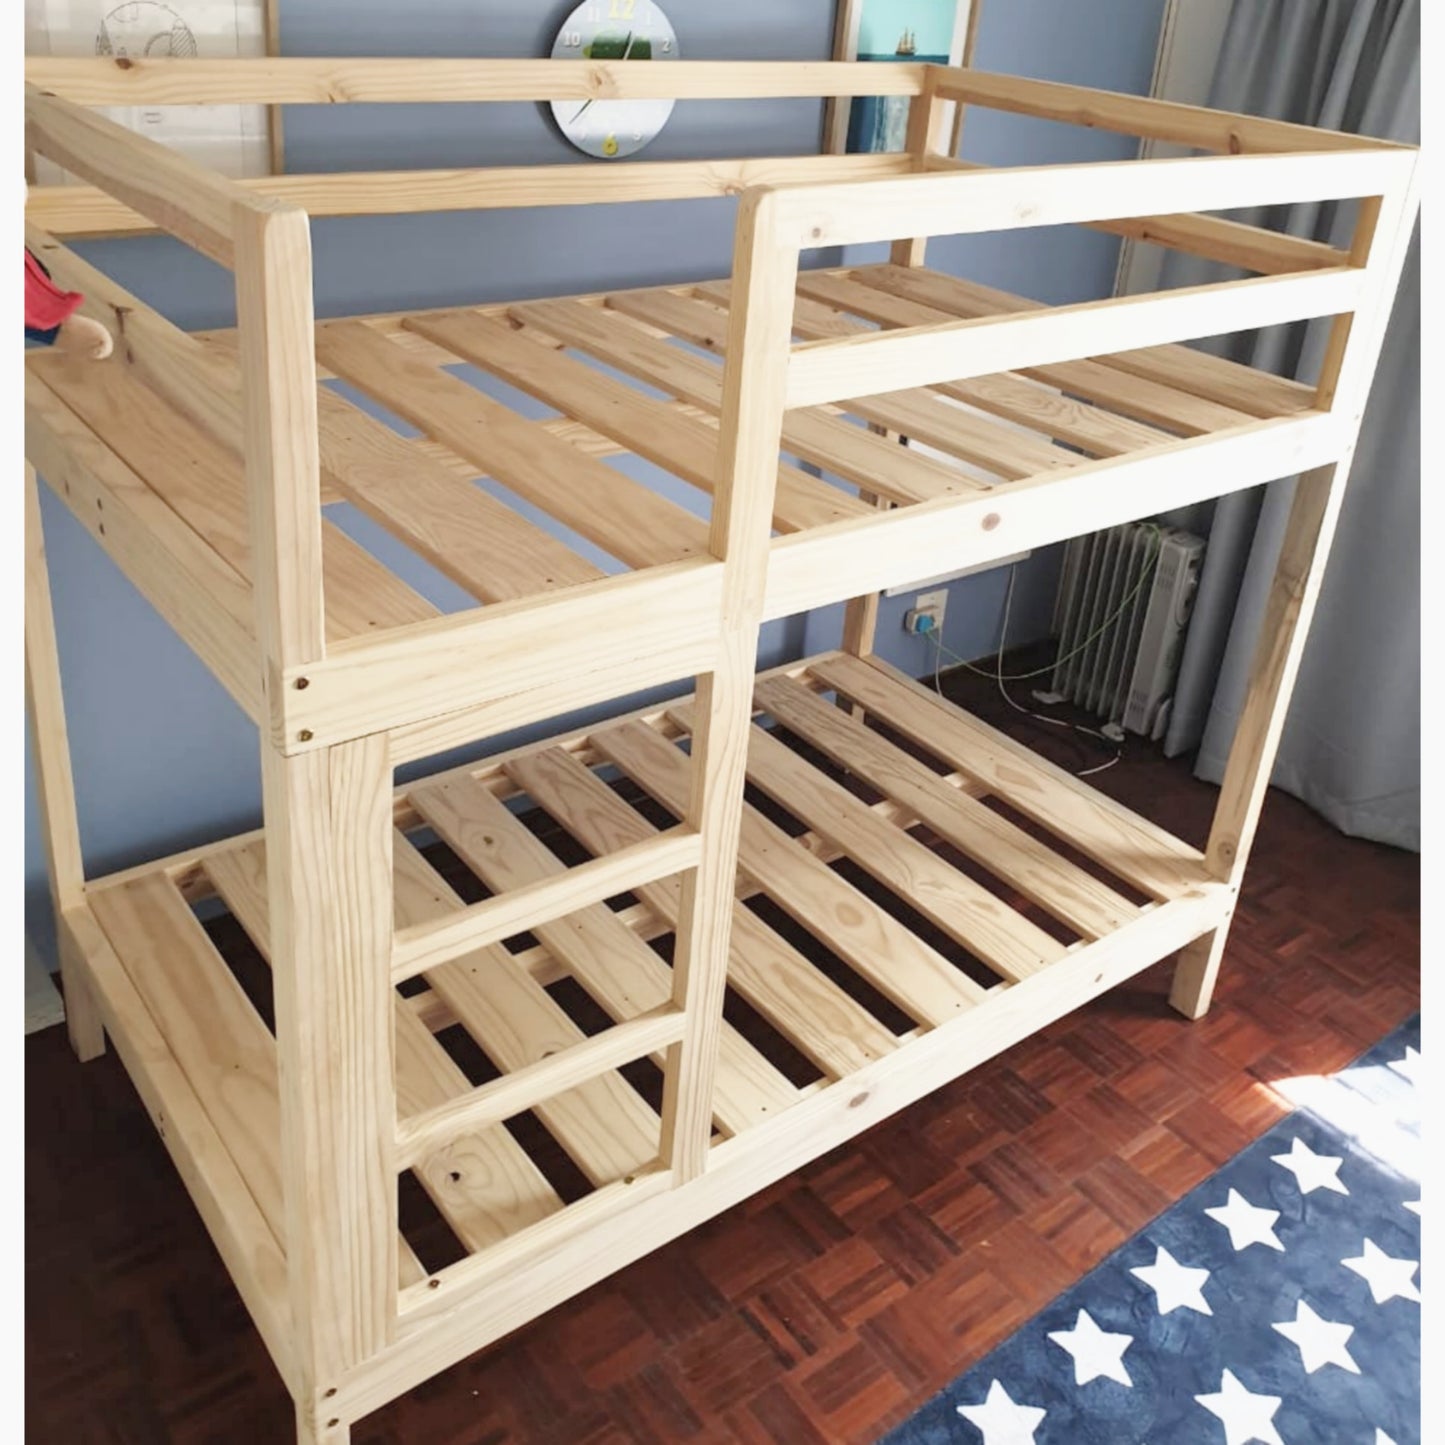 Mickey Bunk Bed with Botttom Base - Furniture